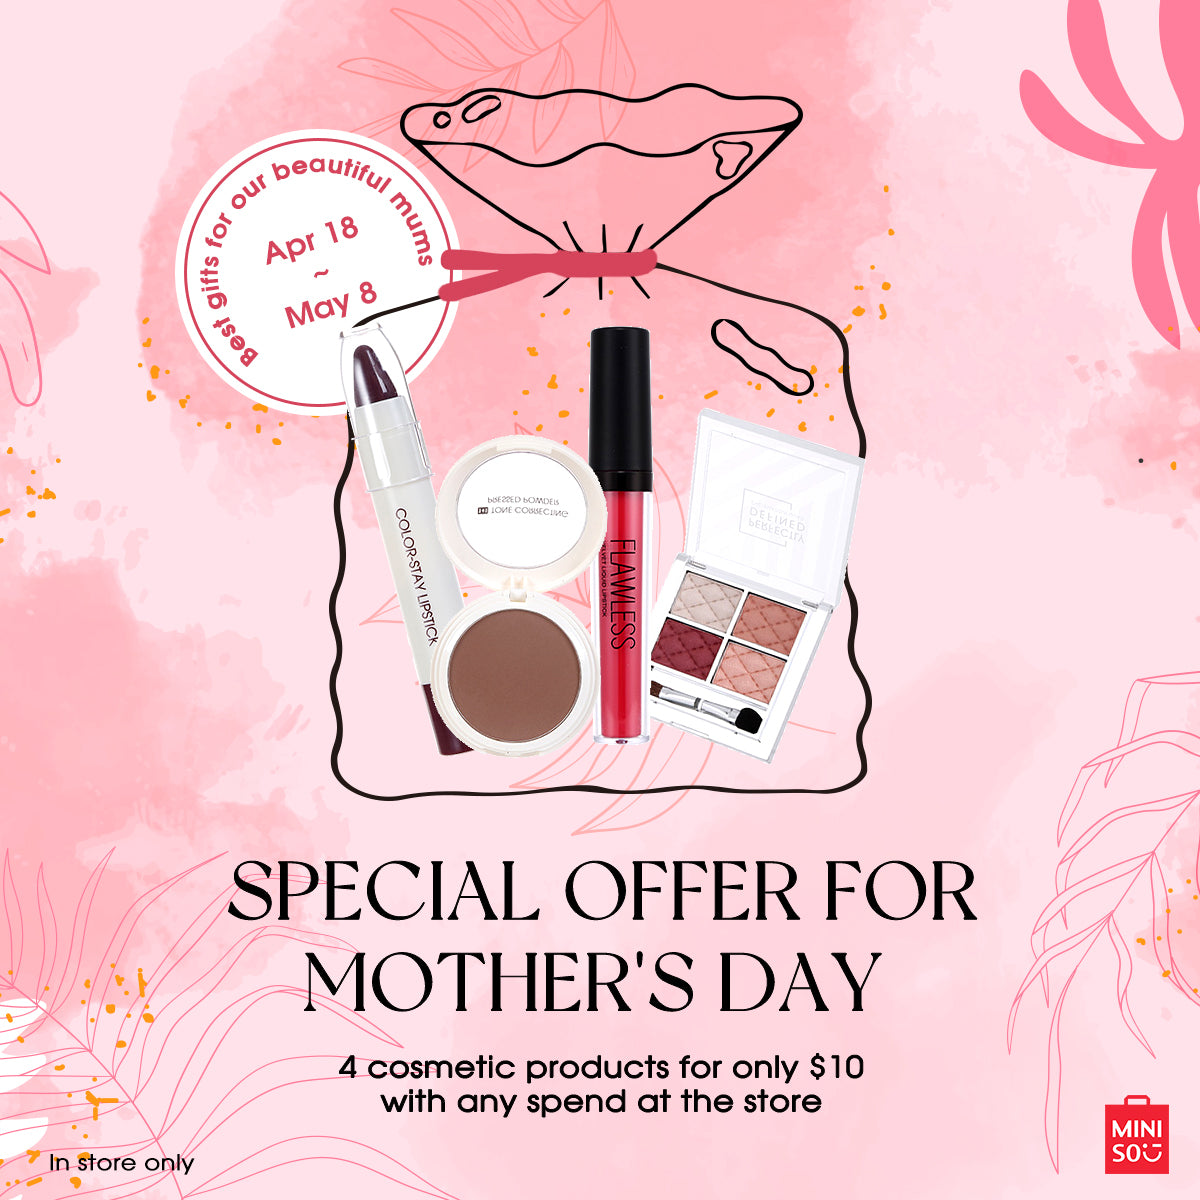 MINISO Australia's Exciting Offers For Mother's Day